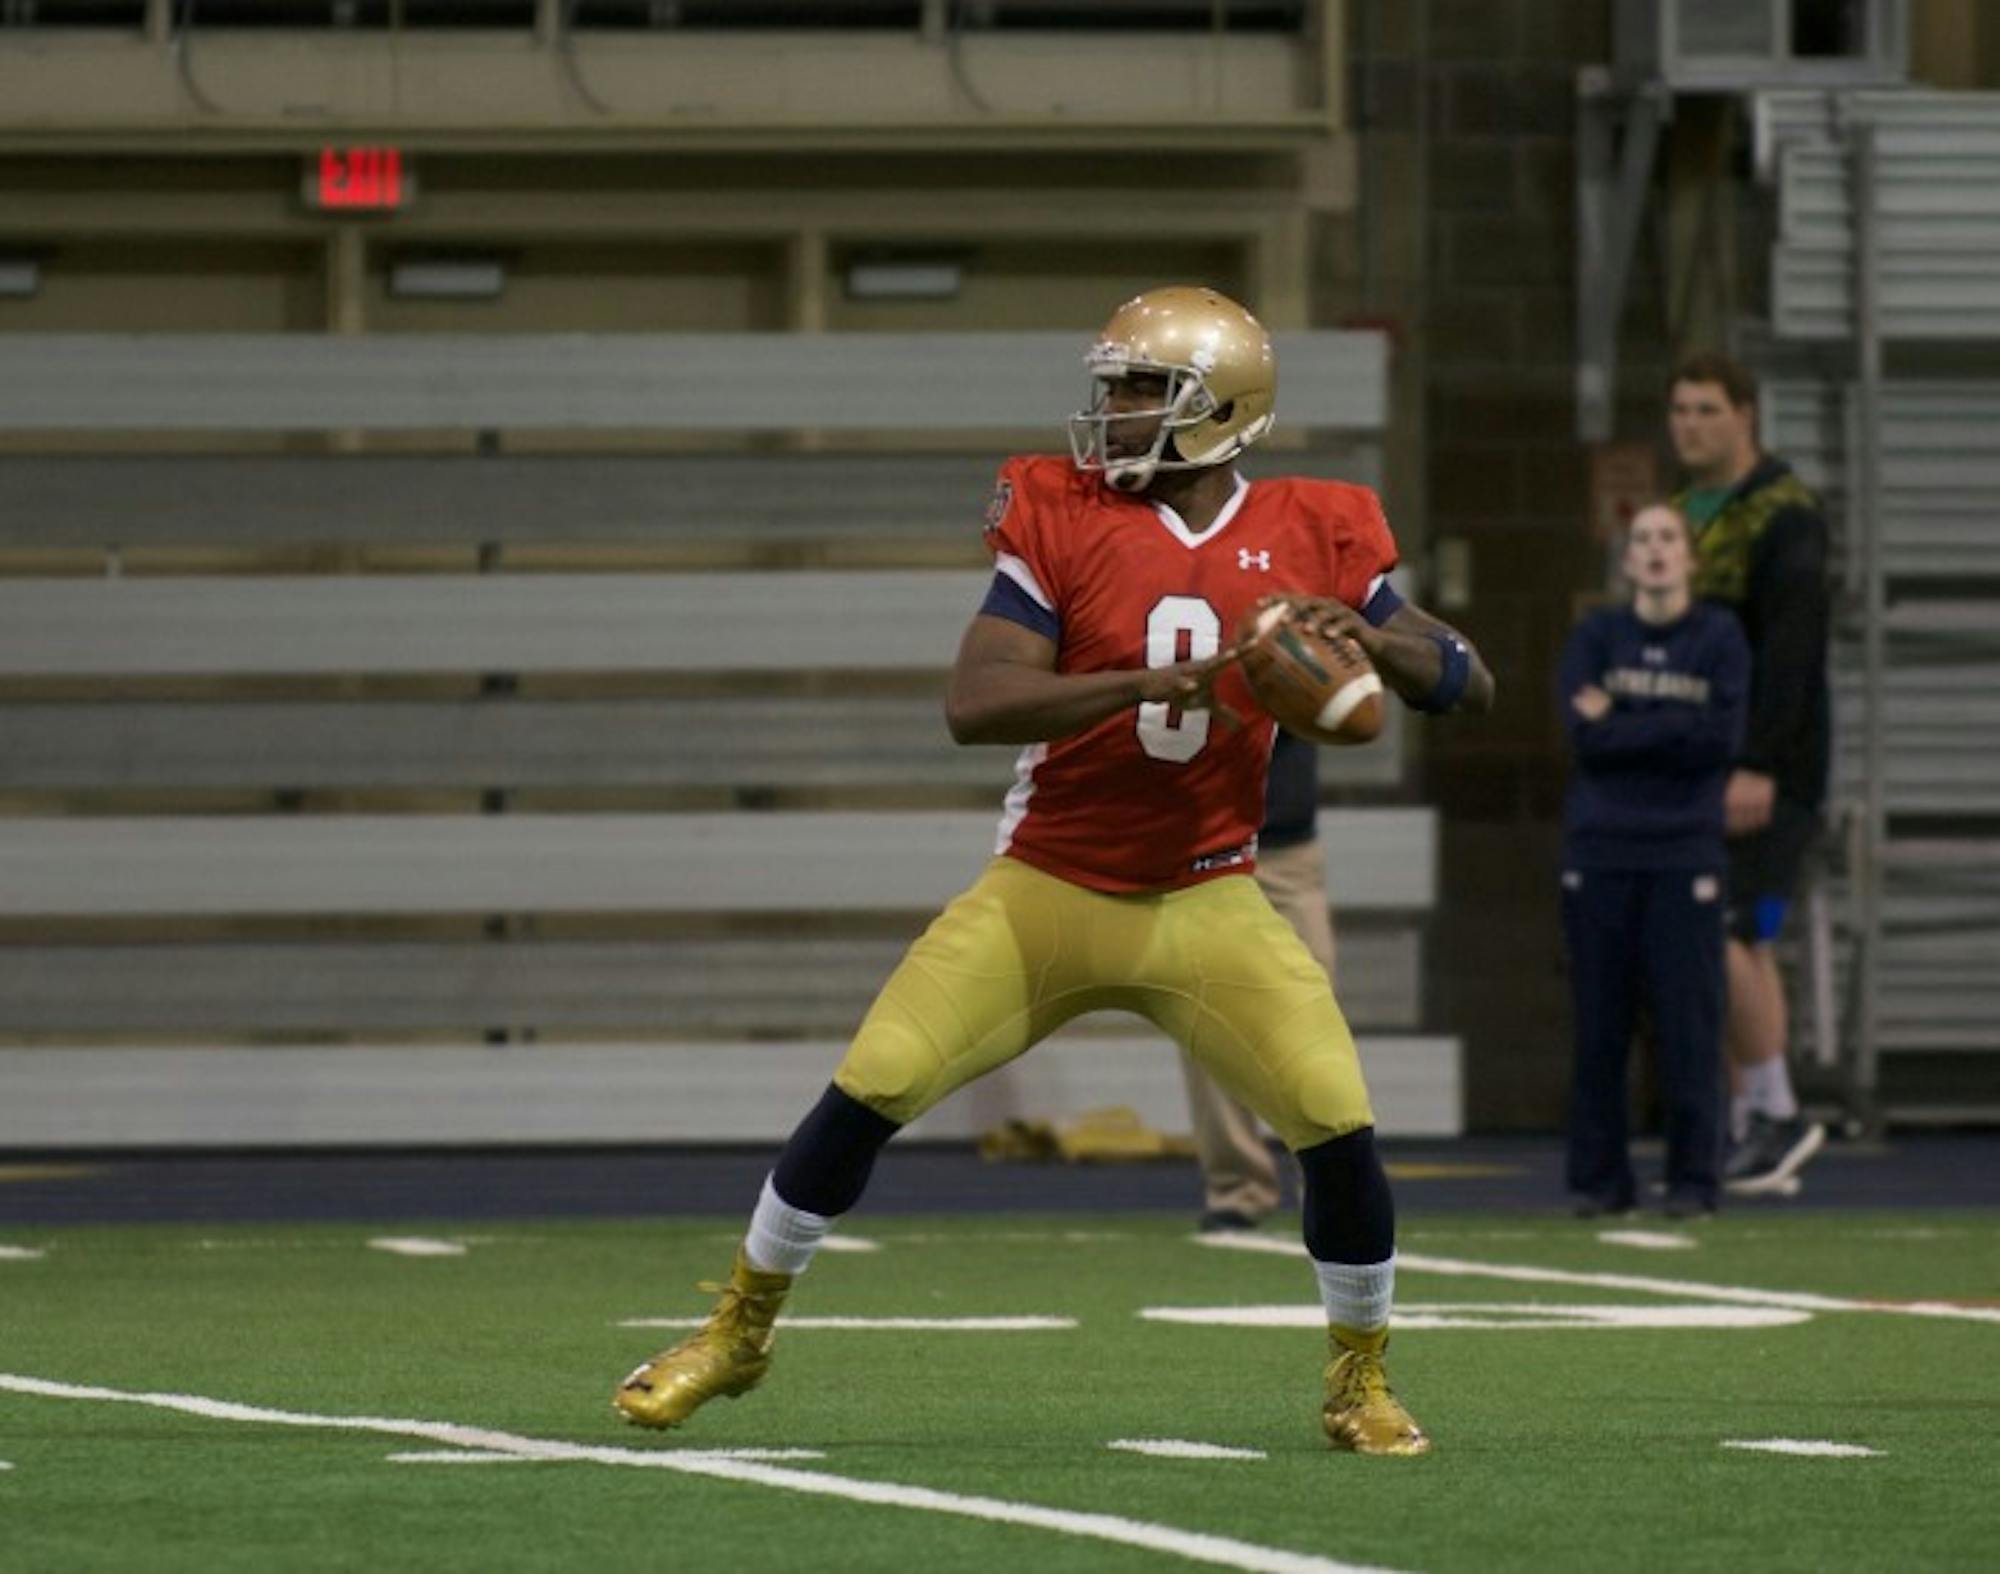 Senior quarterback Malik Zaire drops back to pass during a practice on Tuesday morning at Loftus Sports Center.